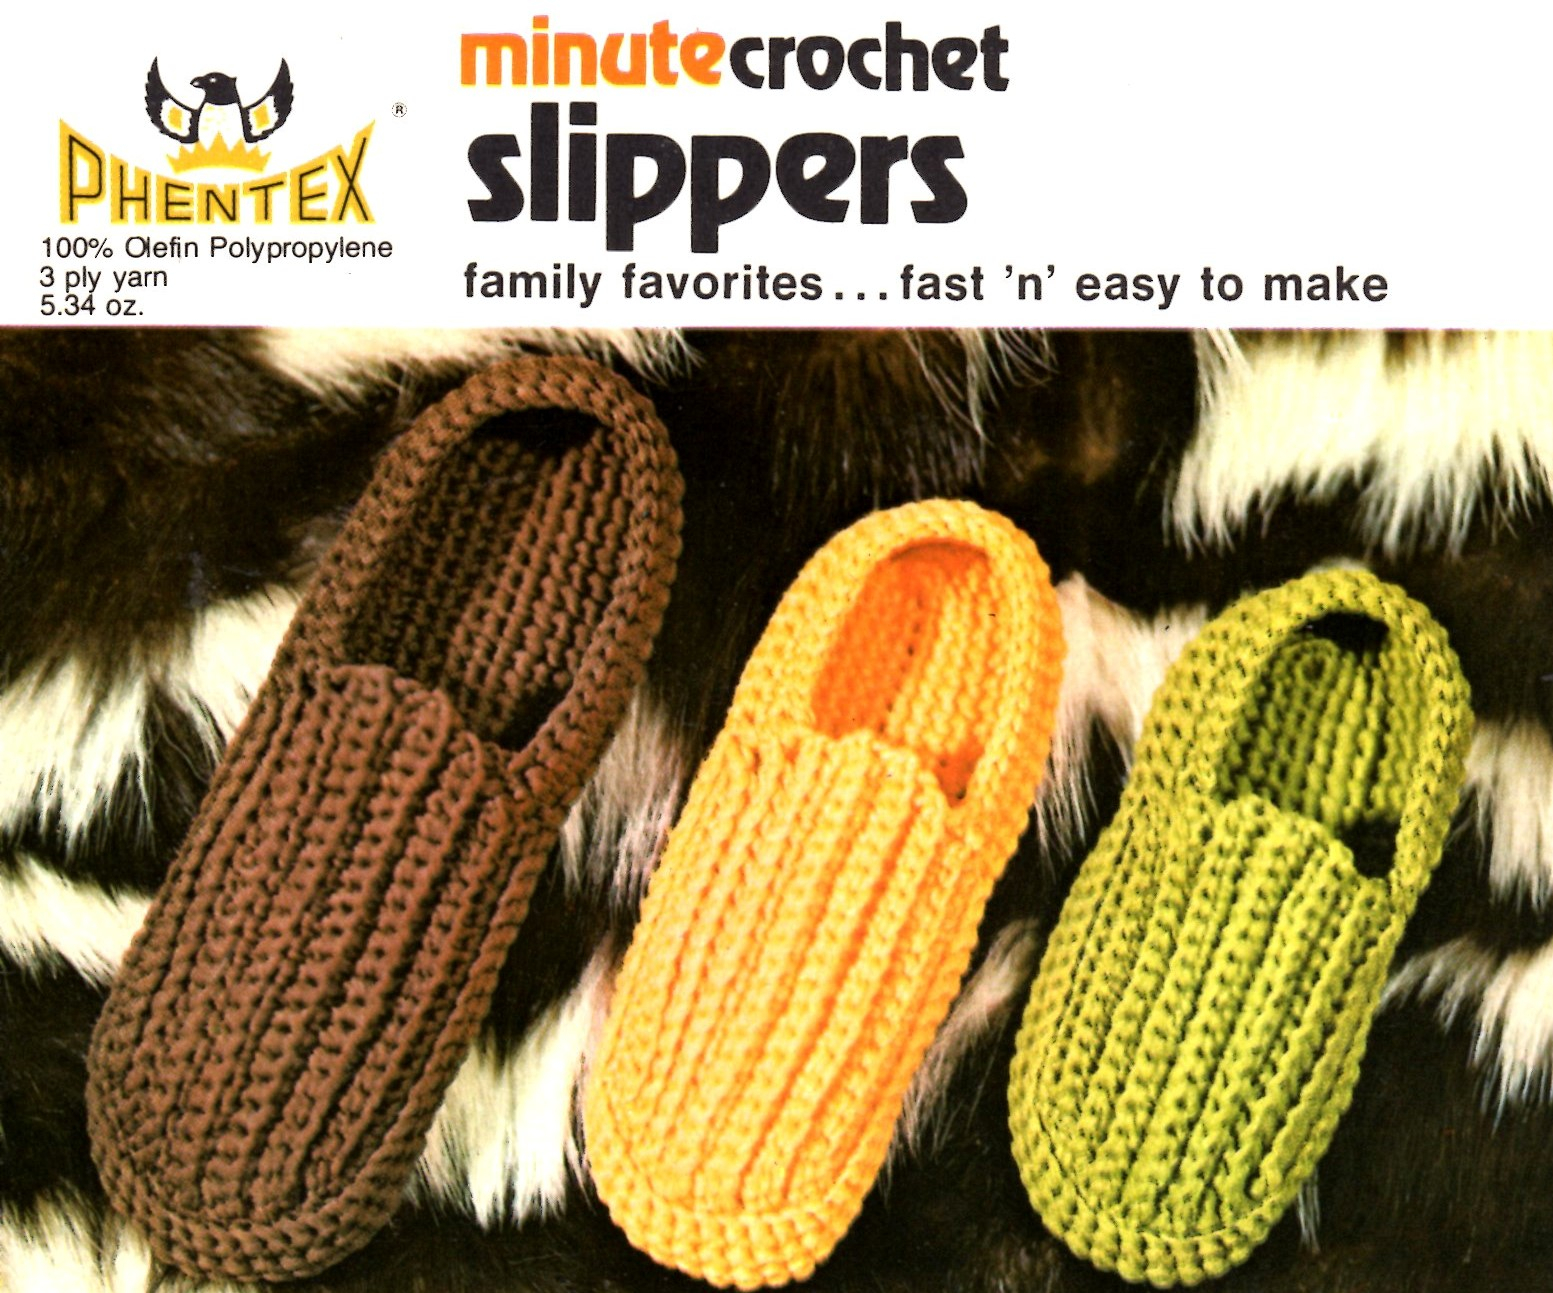 Crochet Bootie Pattern For Adults Minute Crochet Slippers For The Whole Family Fast And Easy To Make